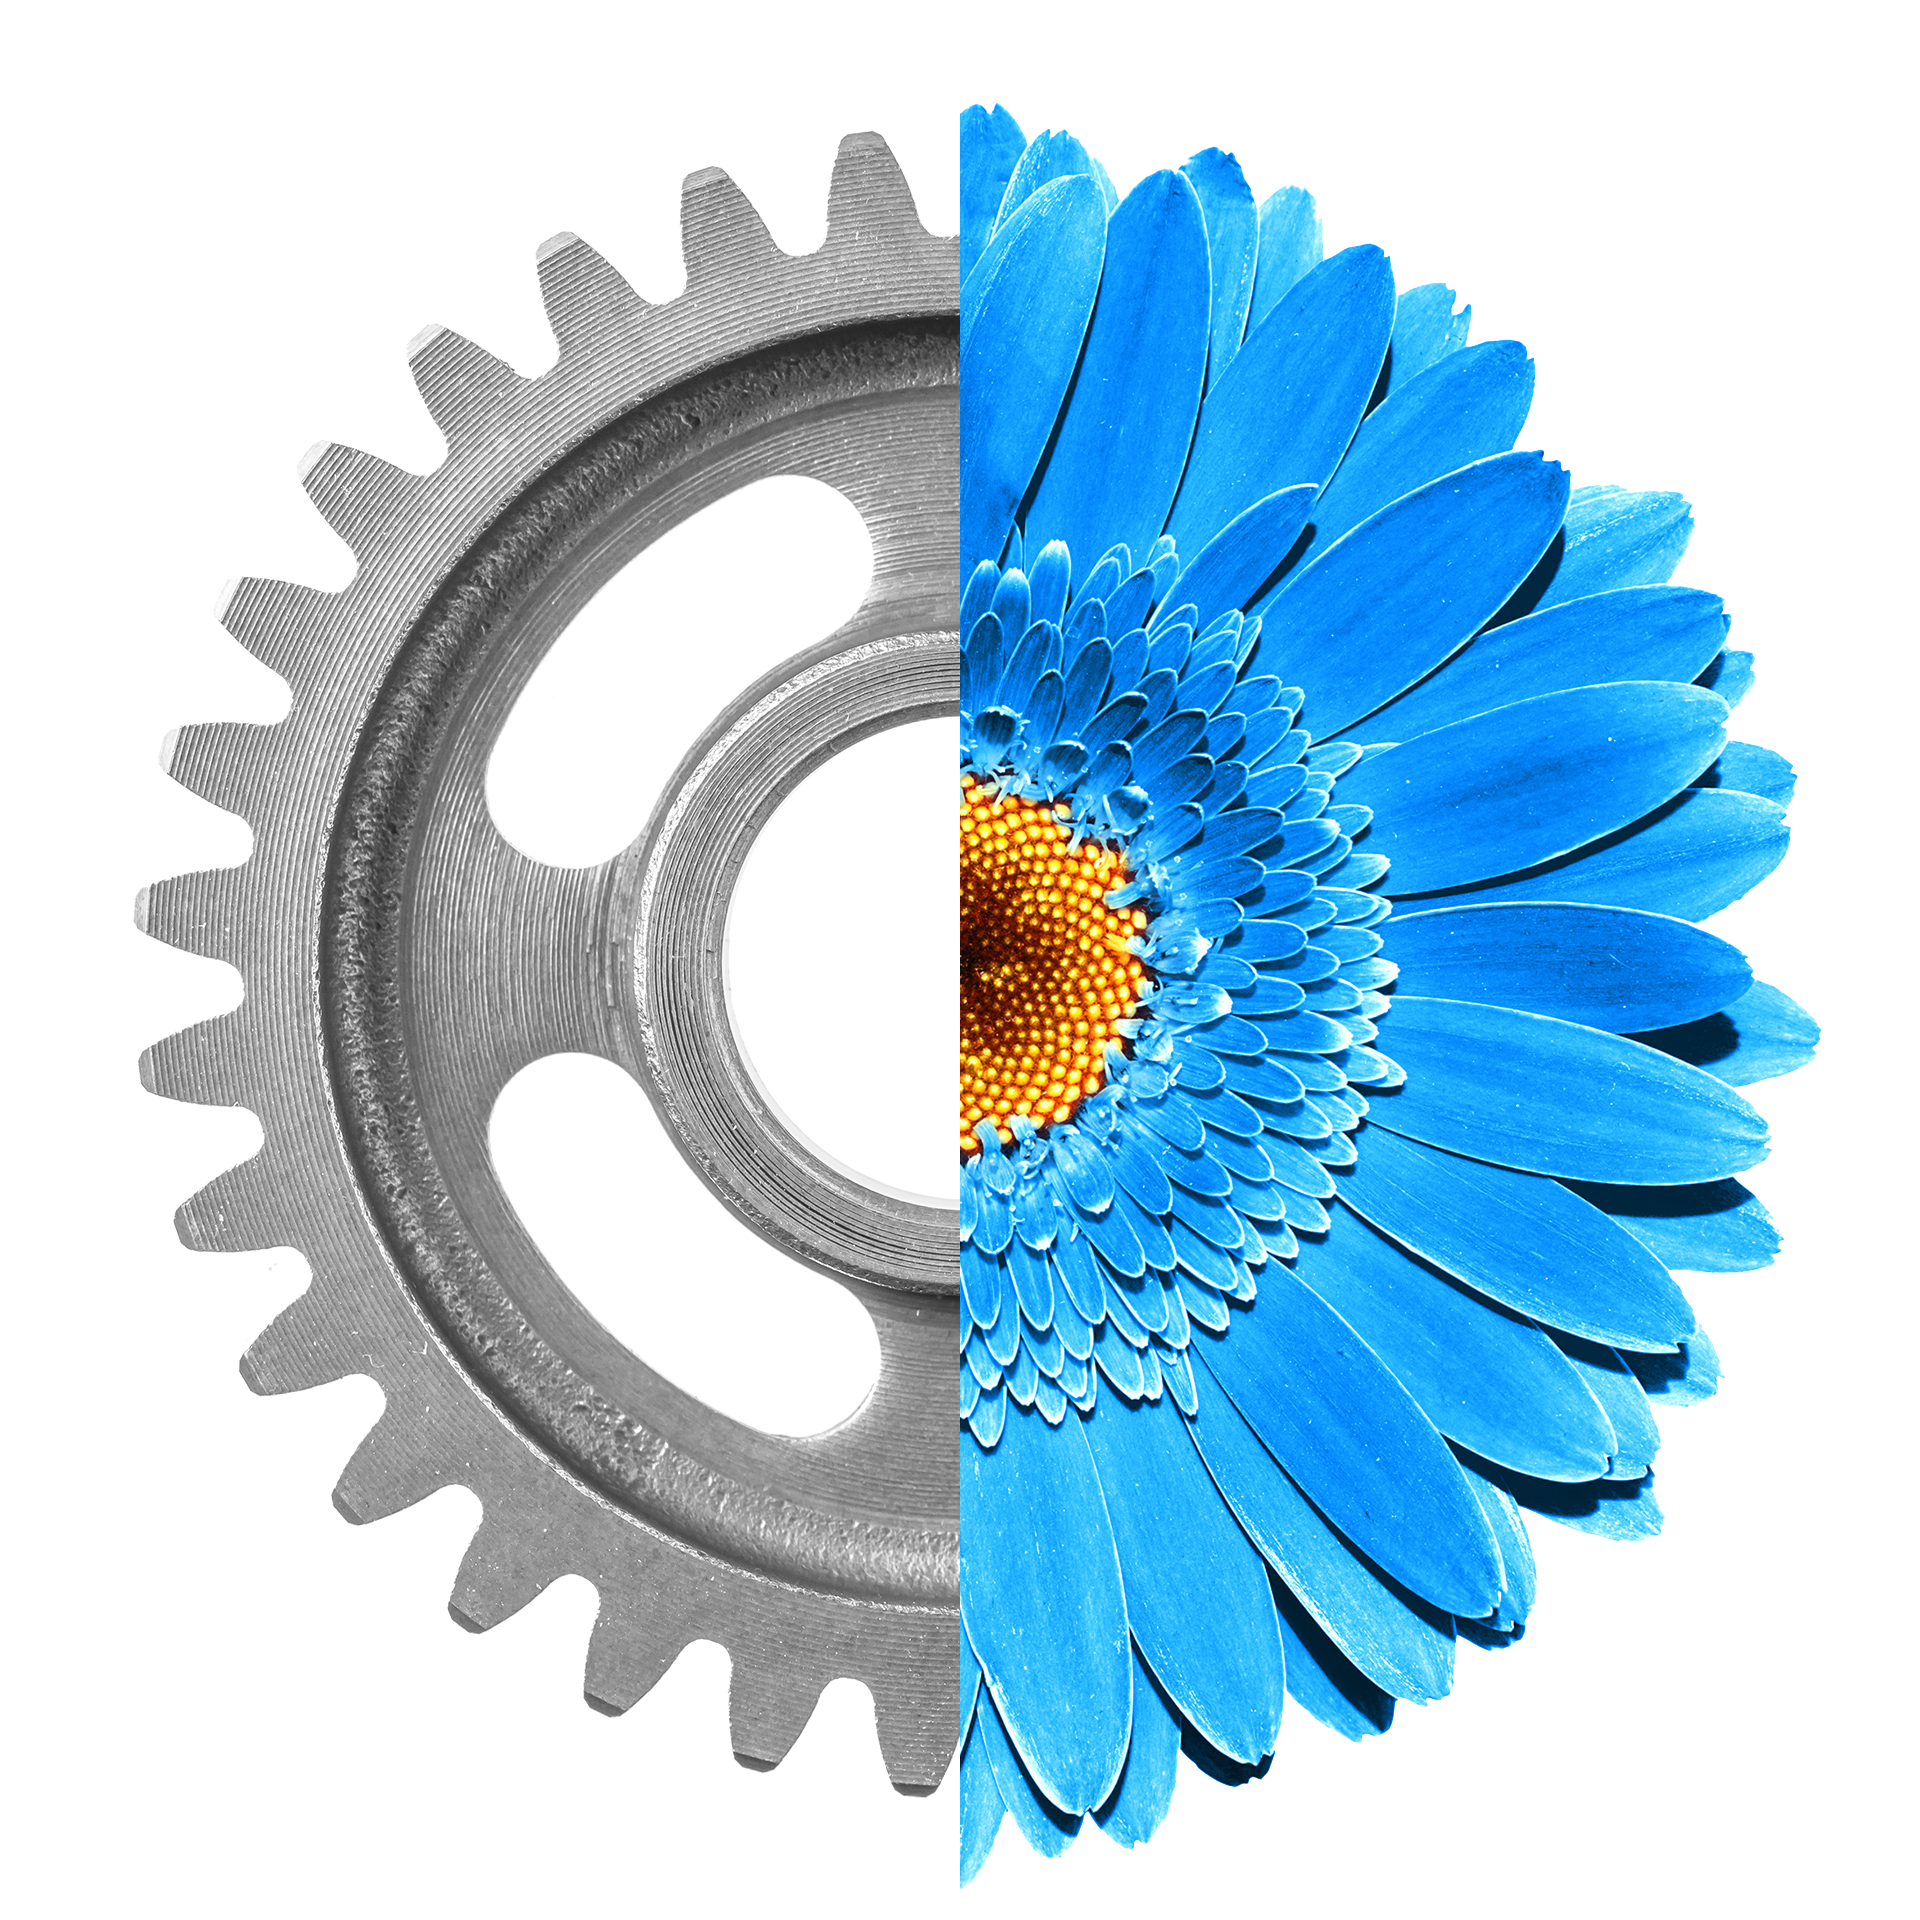 A gear and a flower arranged in a seamless circle